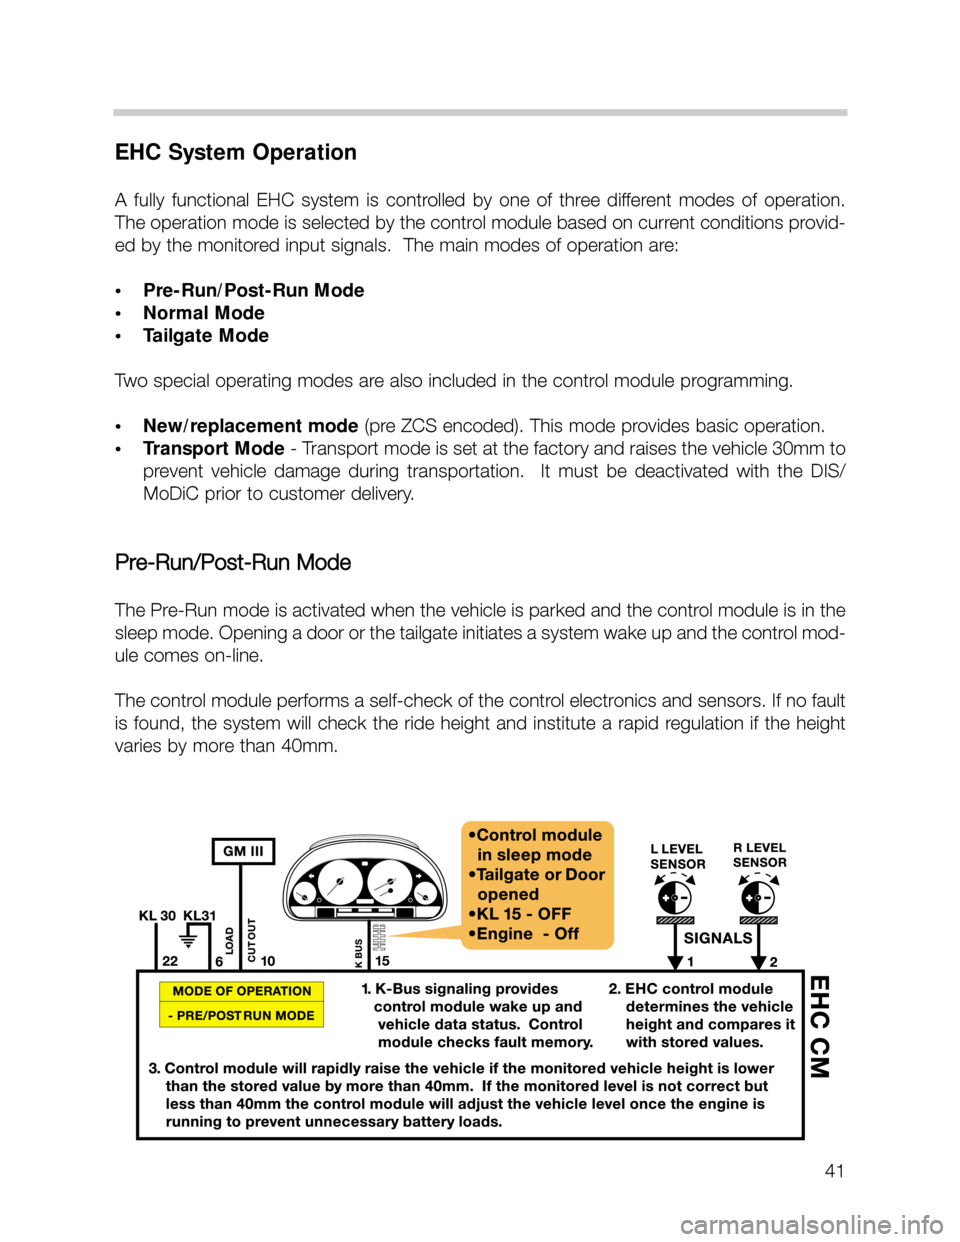 BMW X5 2002 E53 Service Manual 41
EHC System Operation
A  fully  functional  EHC  system  is  controlled  by  one  of  three  different  modes  of  operation.
The operation mode is selected by the control module based on current co